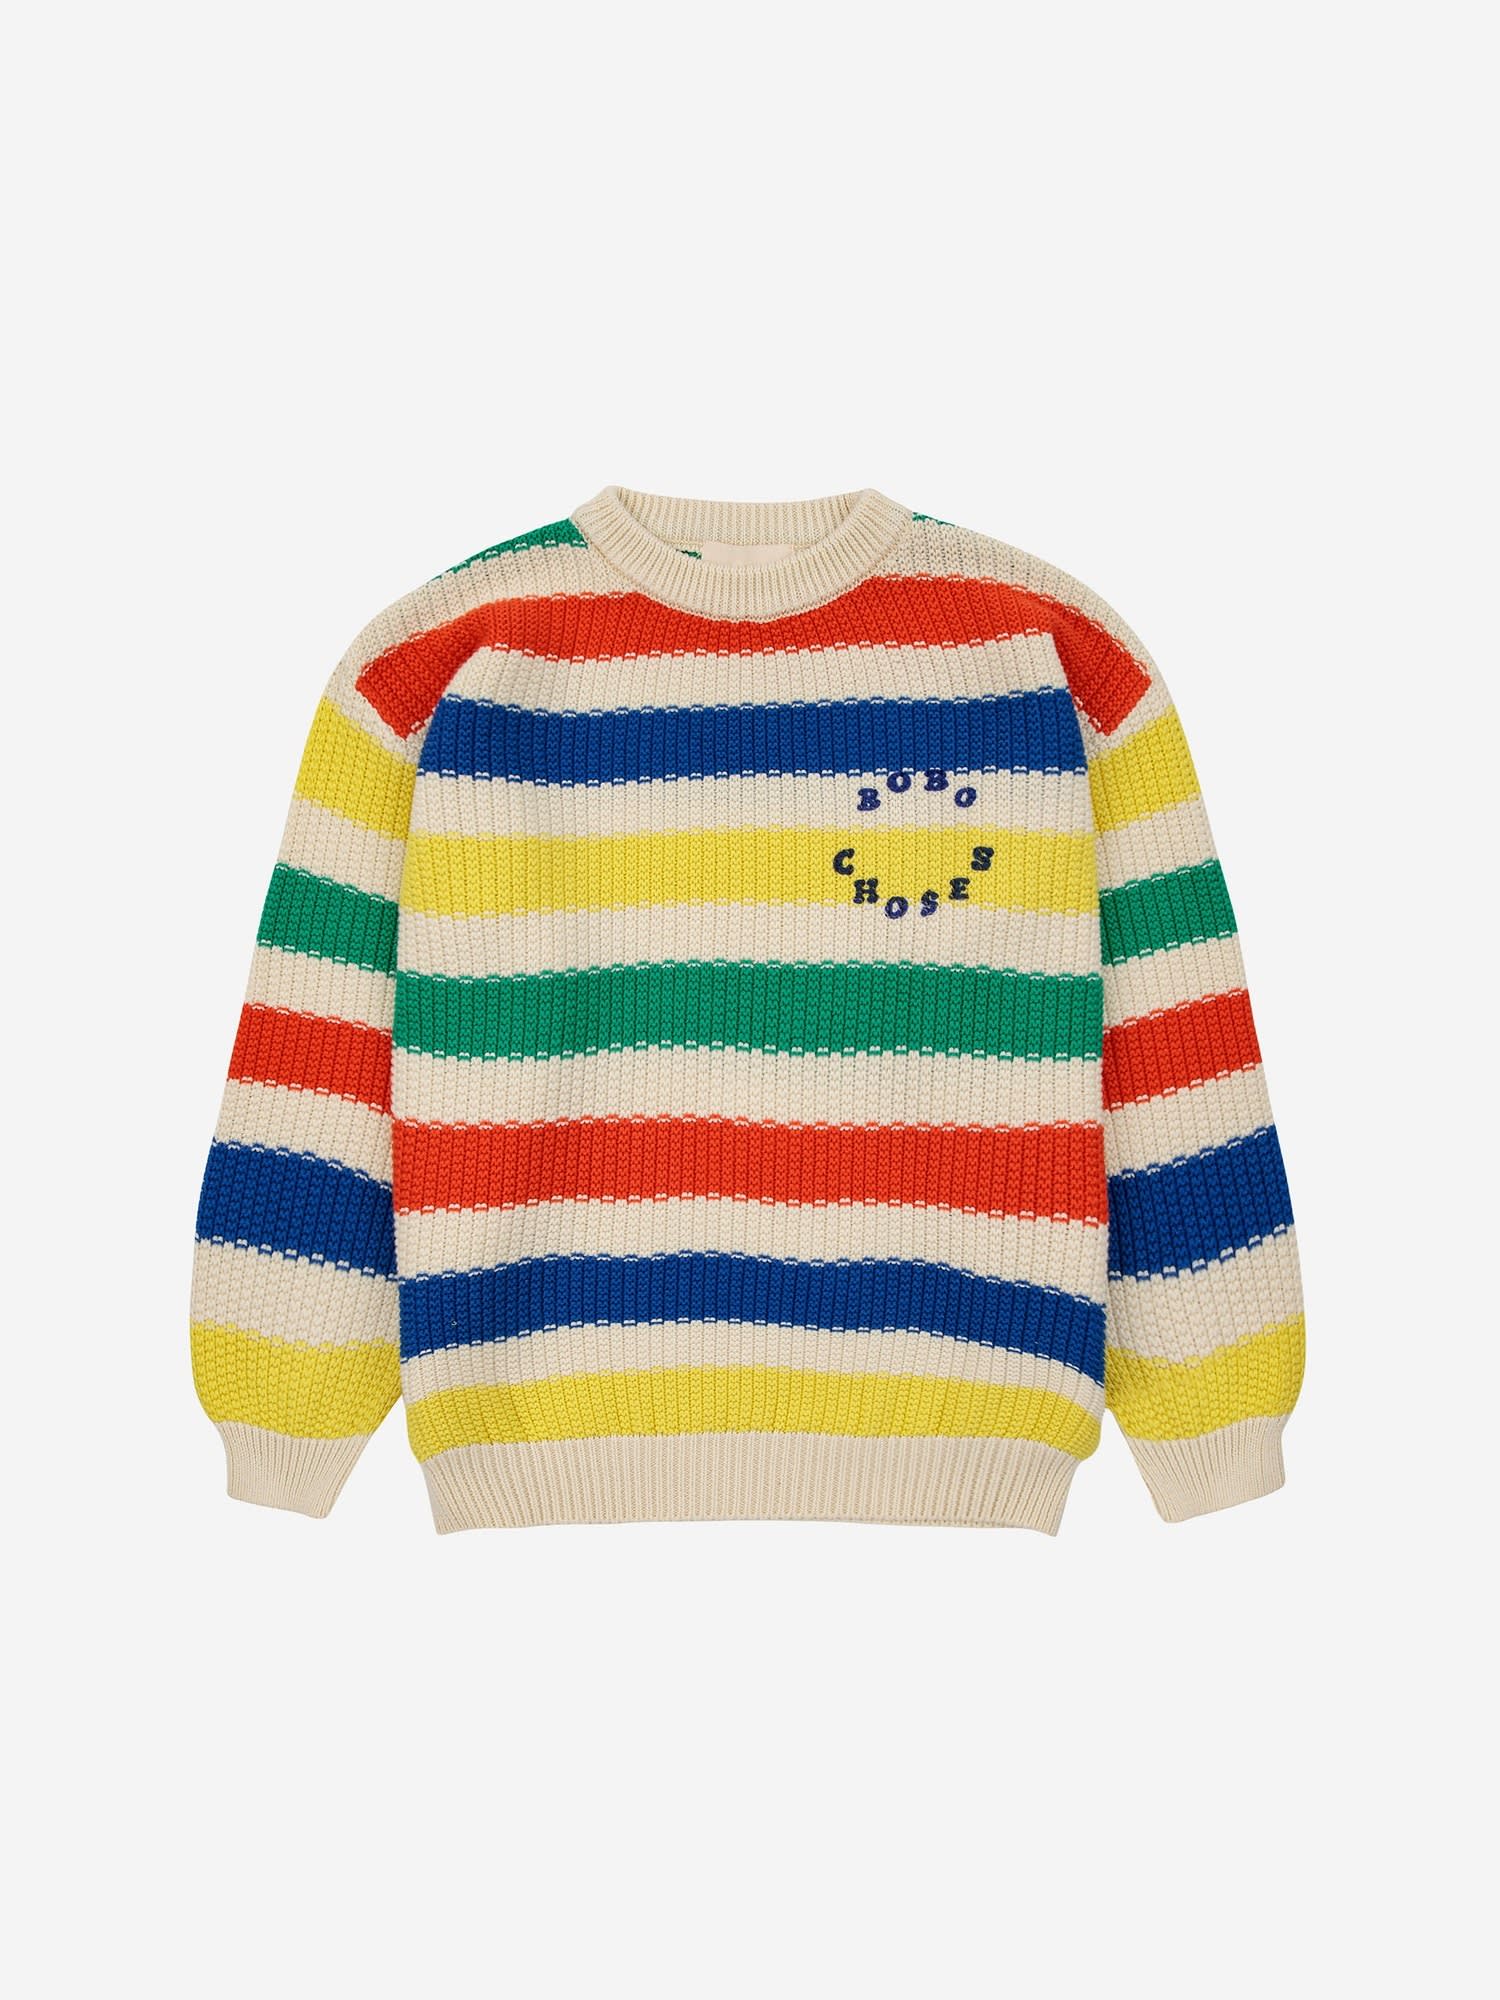 Bobo Choses Multicolored Sweater For Kids With Stripes